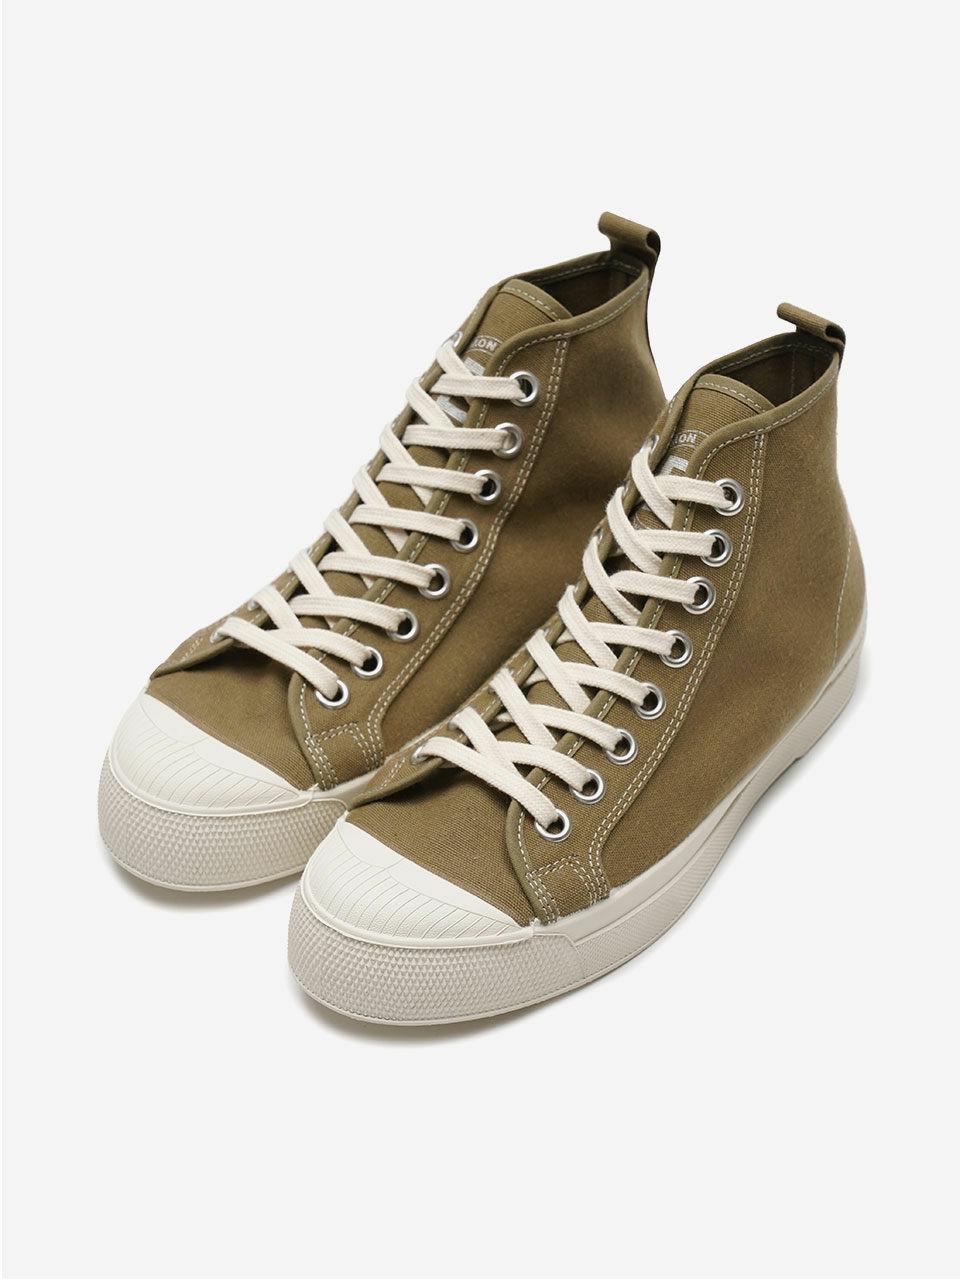 Bensimon Limited Stella B79 Sneakers in Green | Lyst